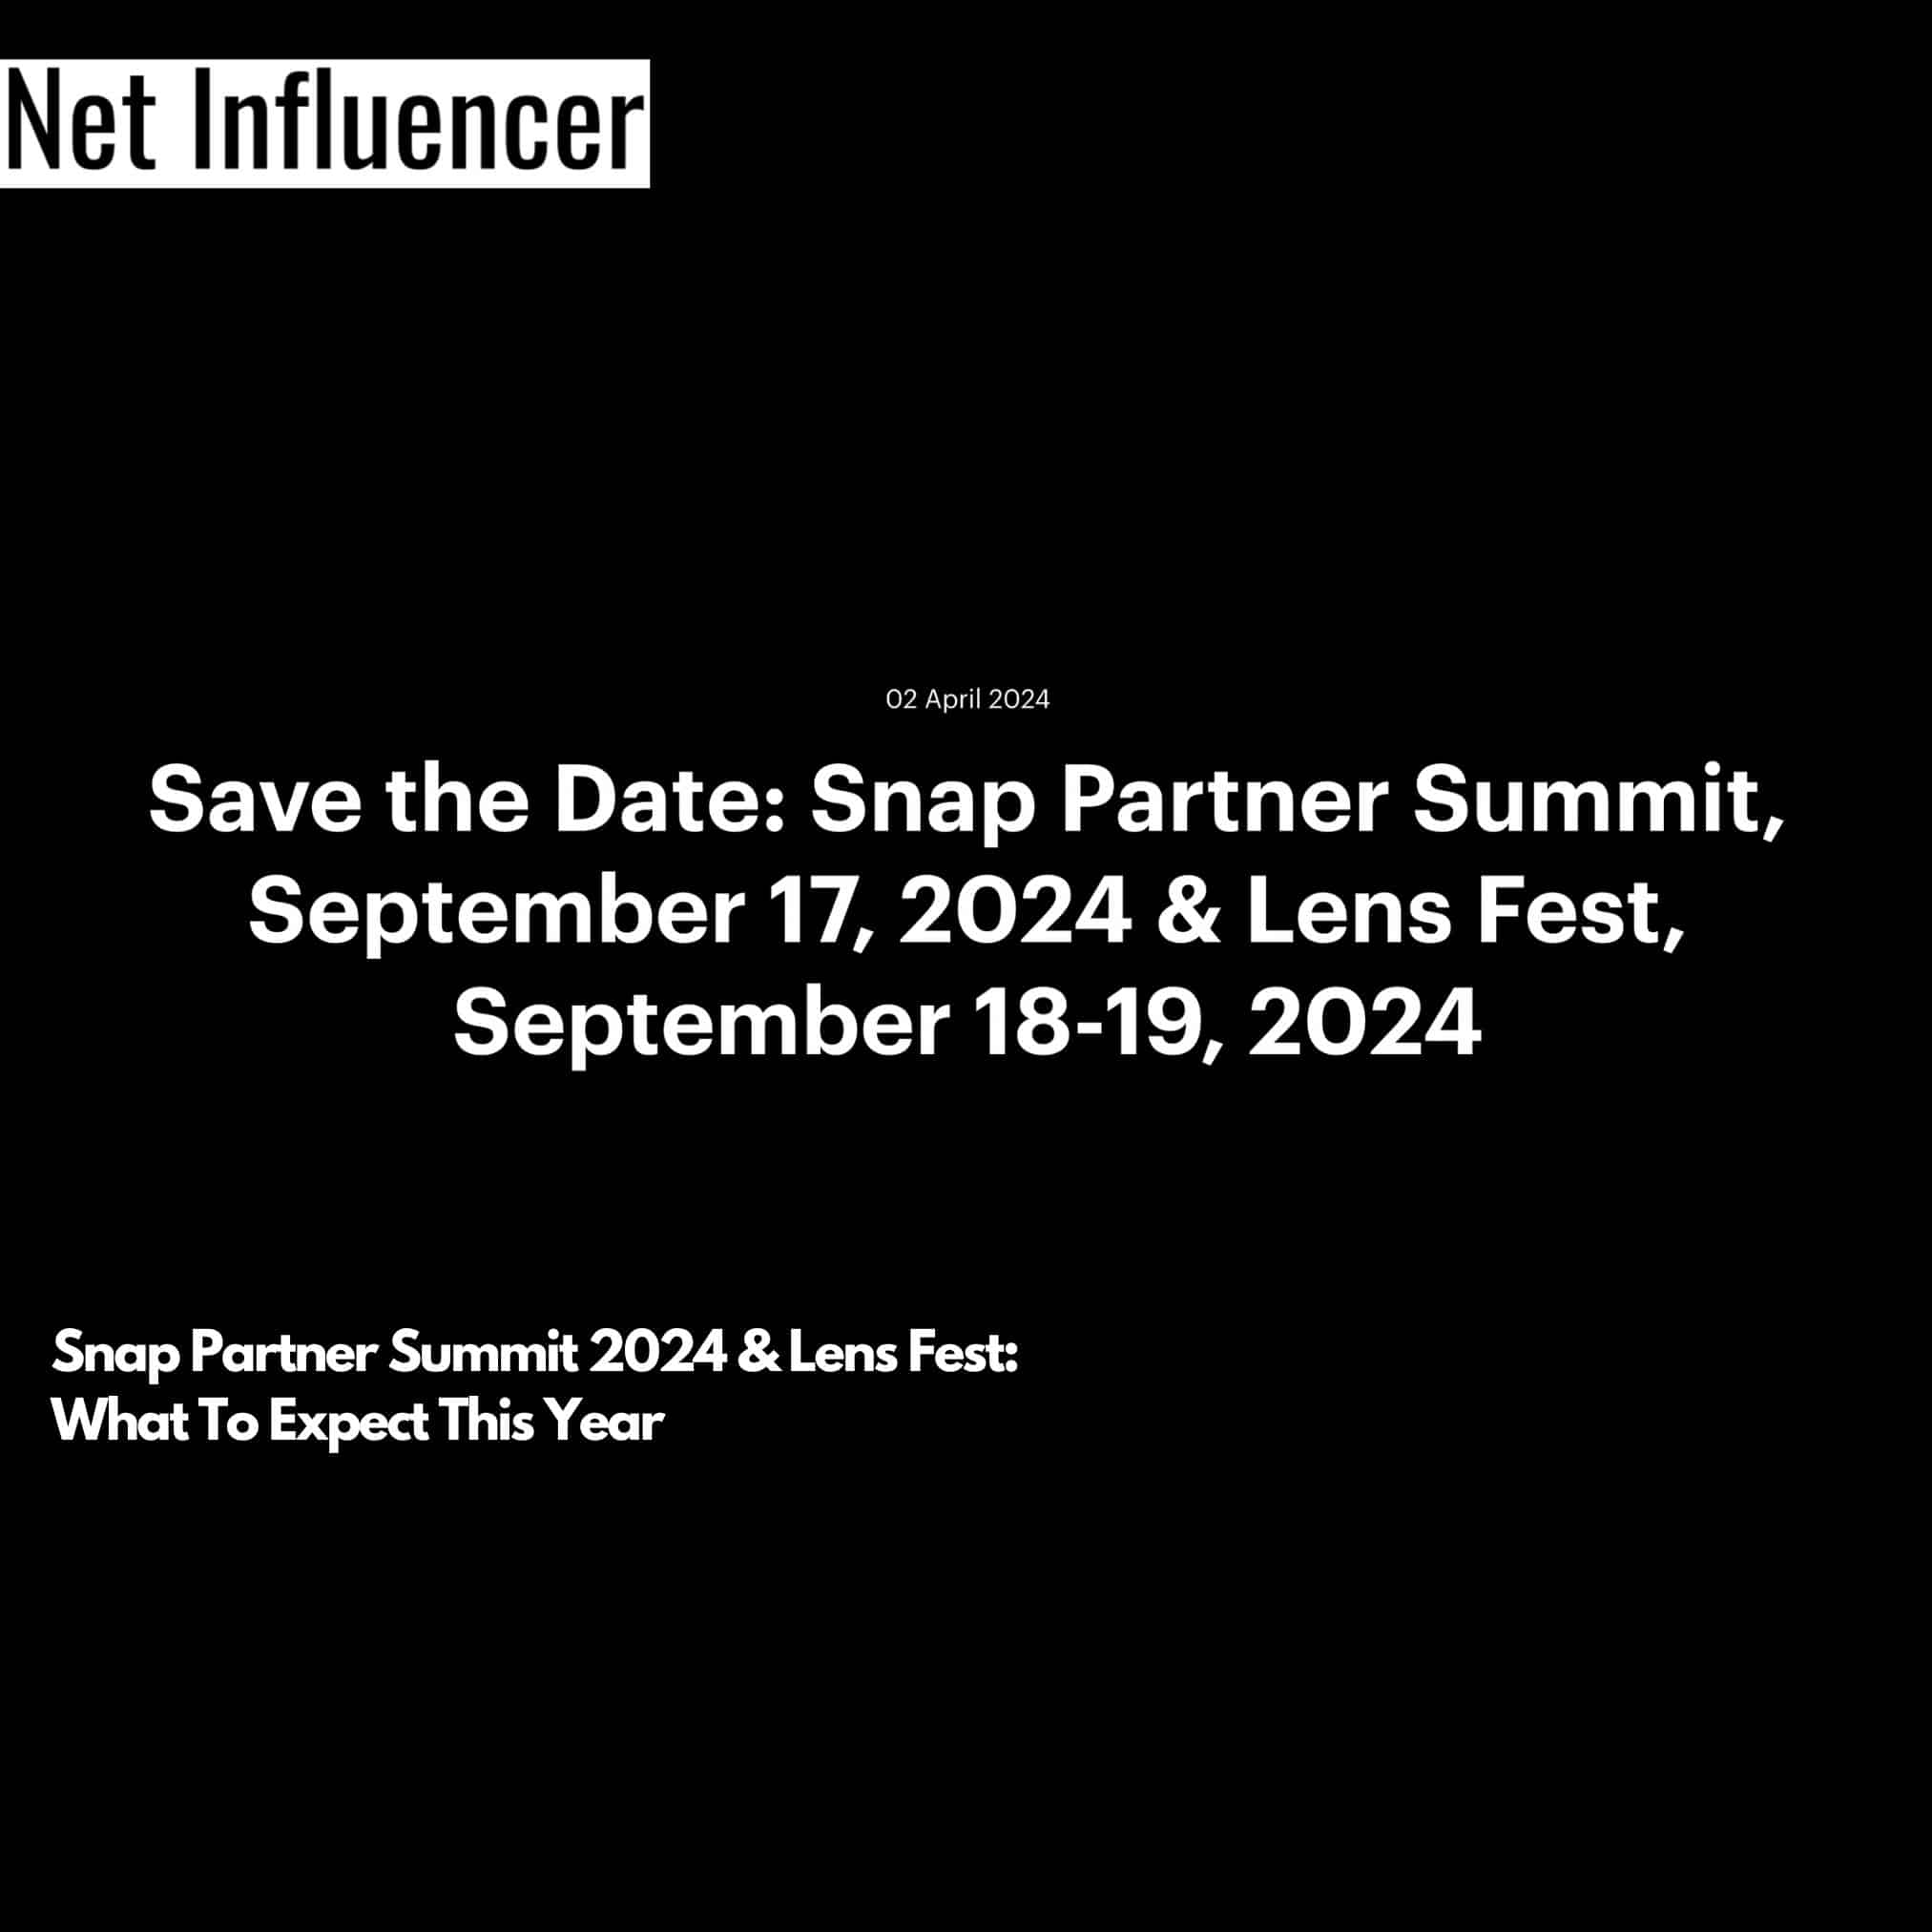 Snap Partner Summit 2024 & Lens Fest What To Expect This Year